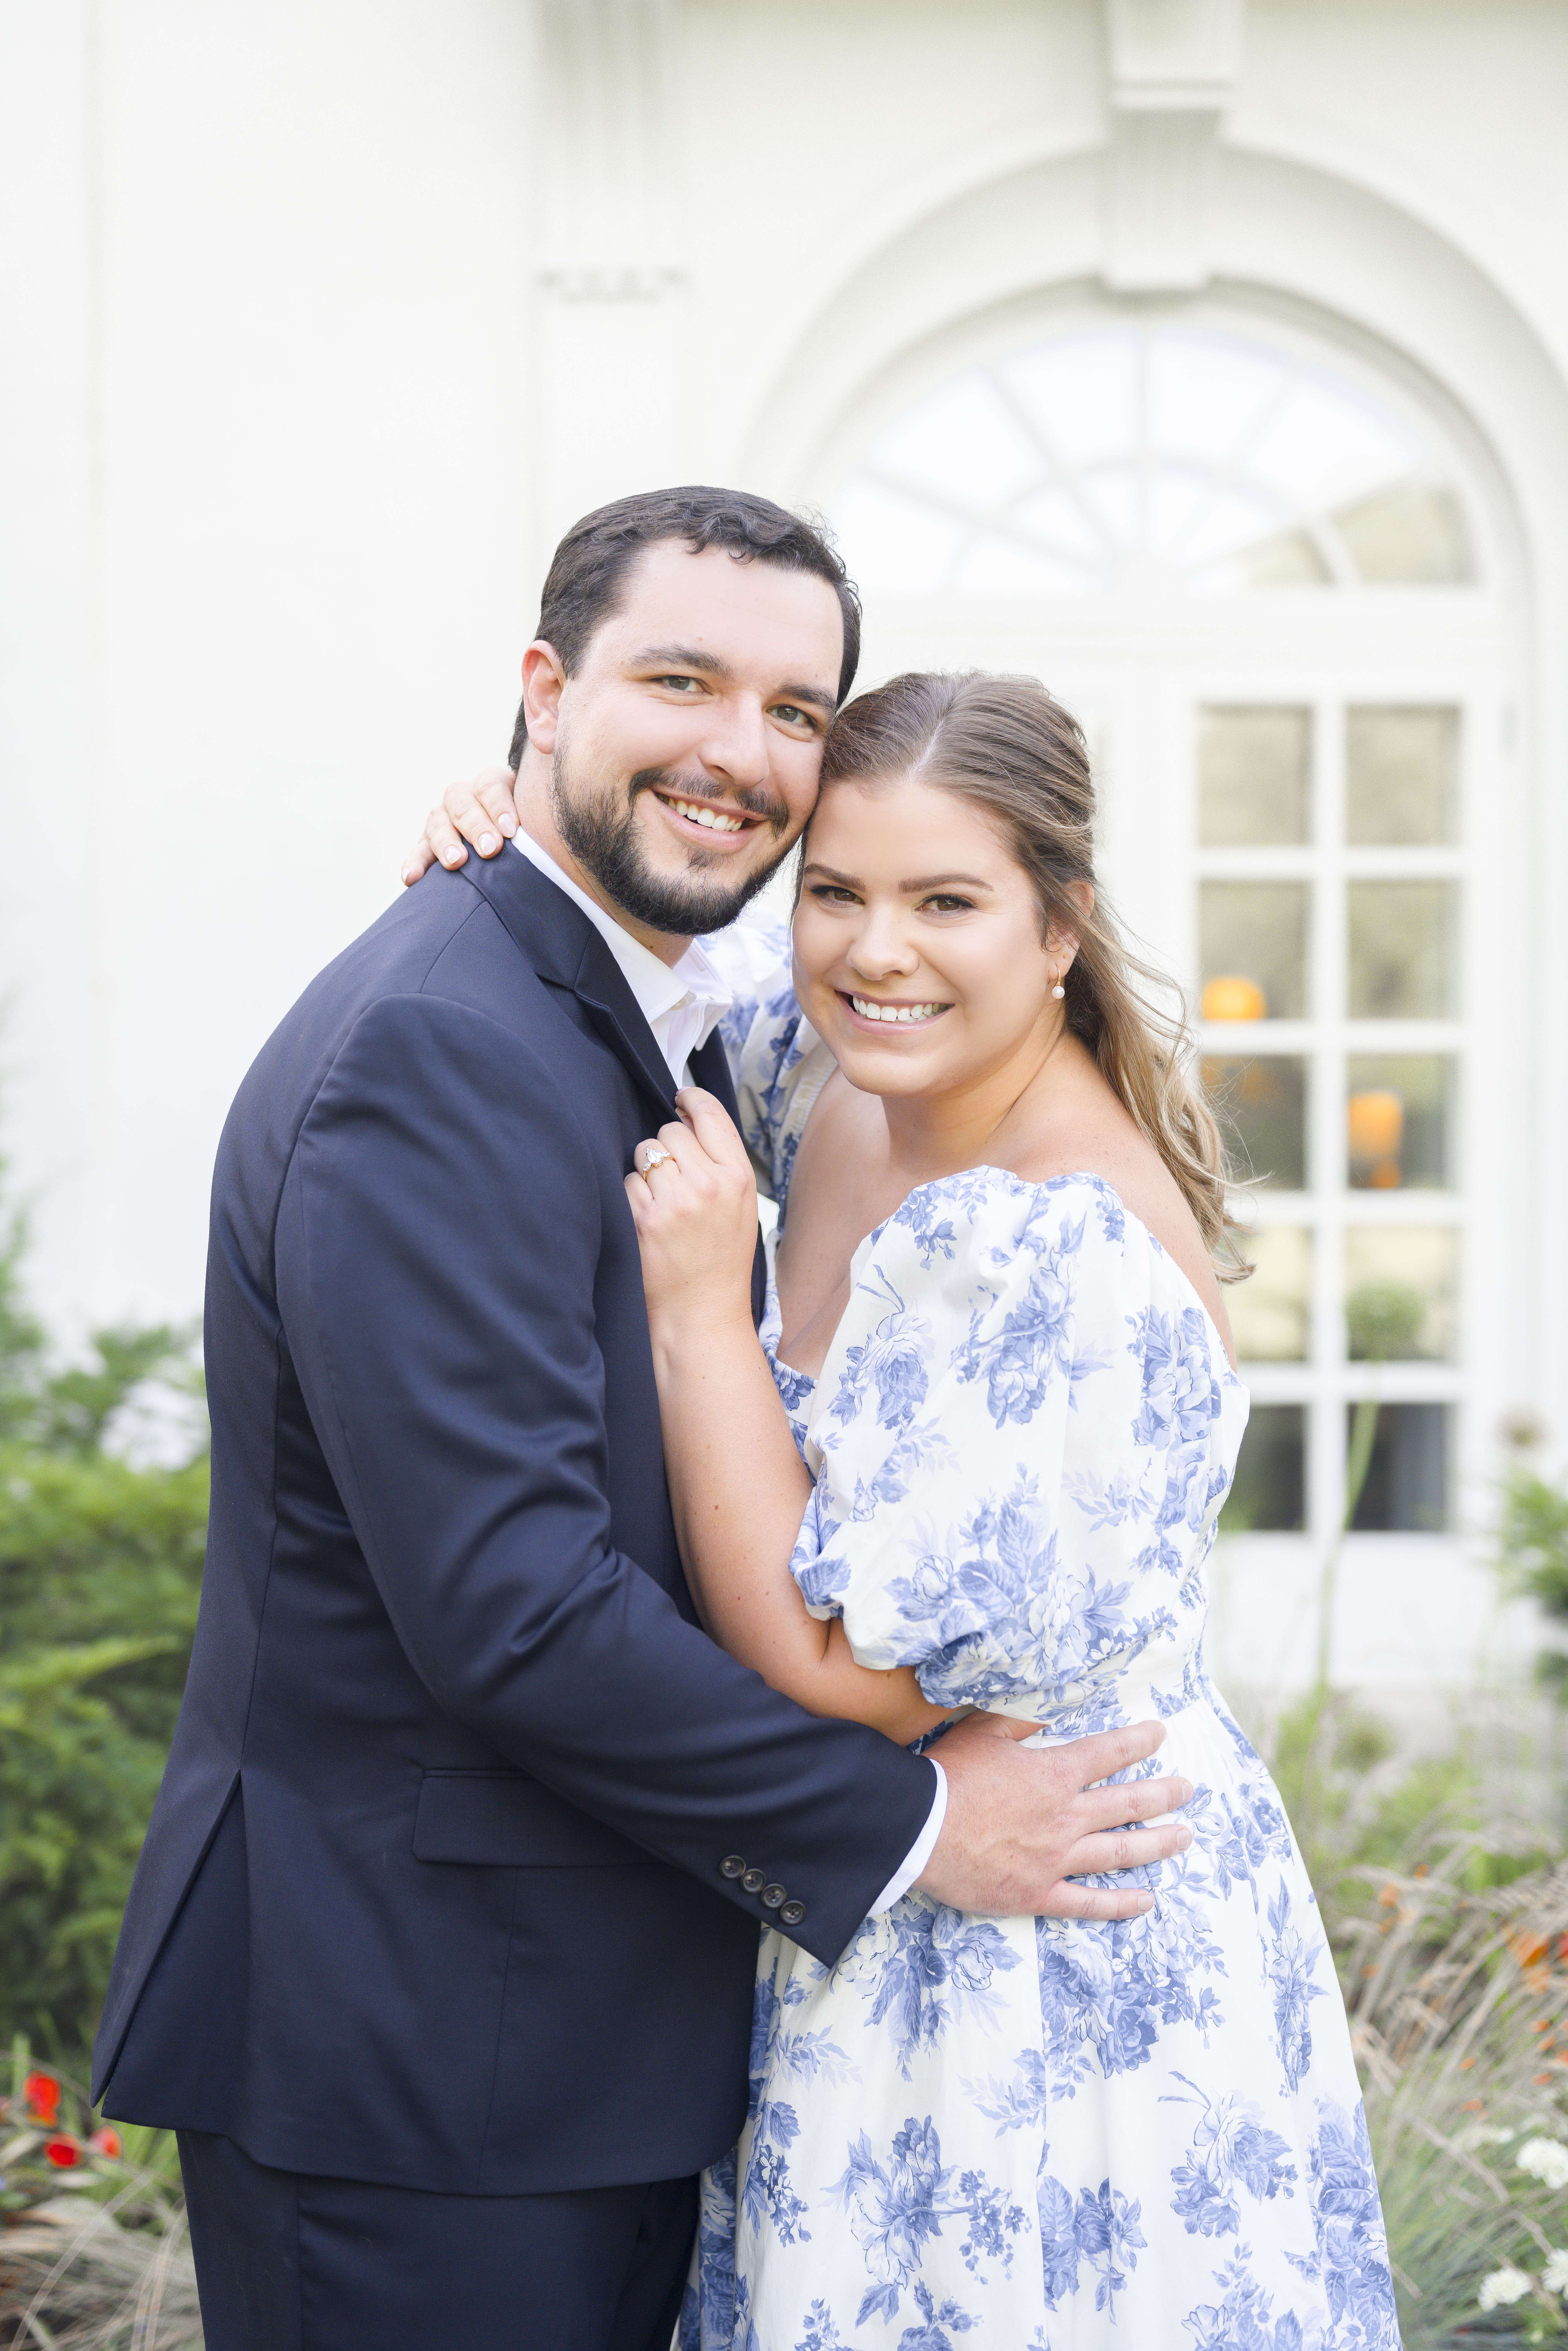 A dreamy engagement session at Newfields among the gardens